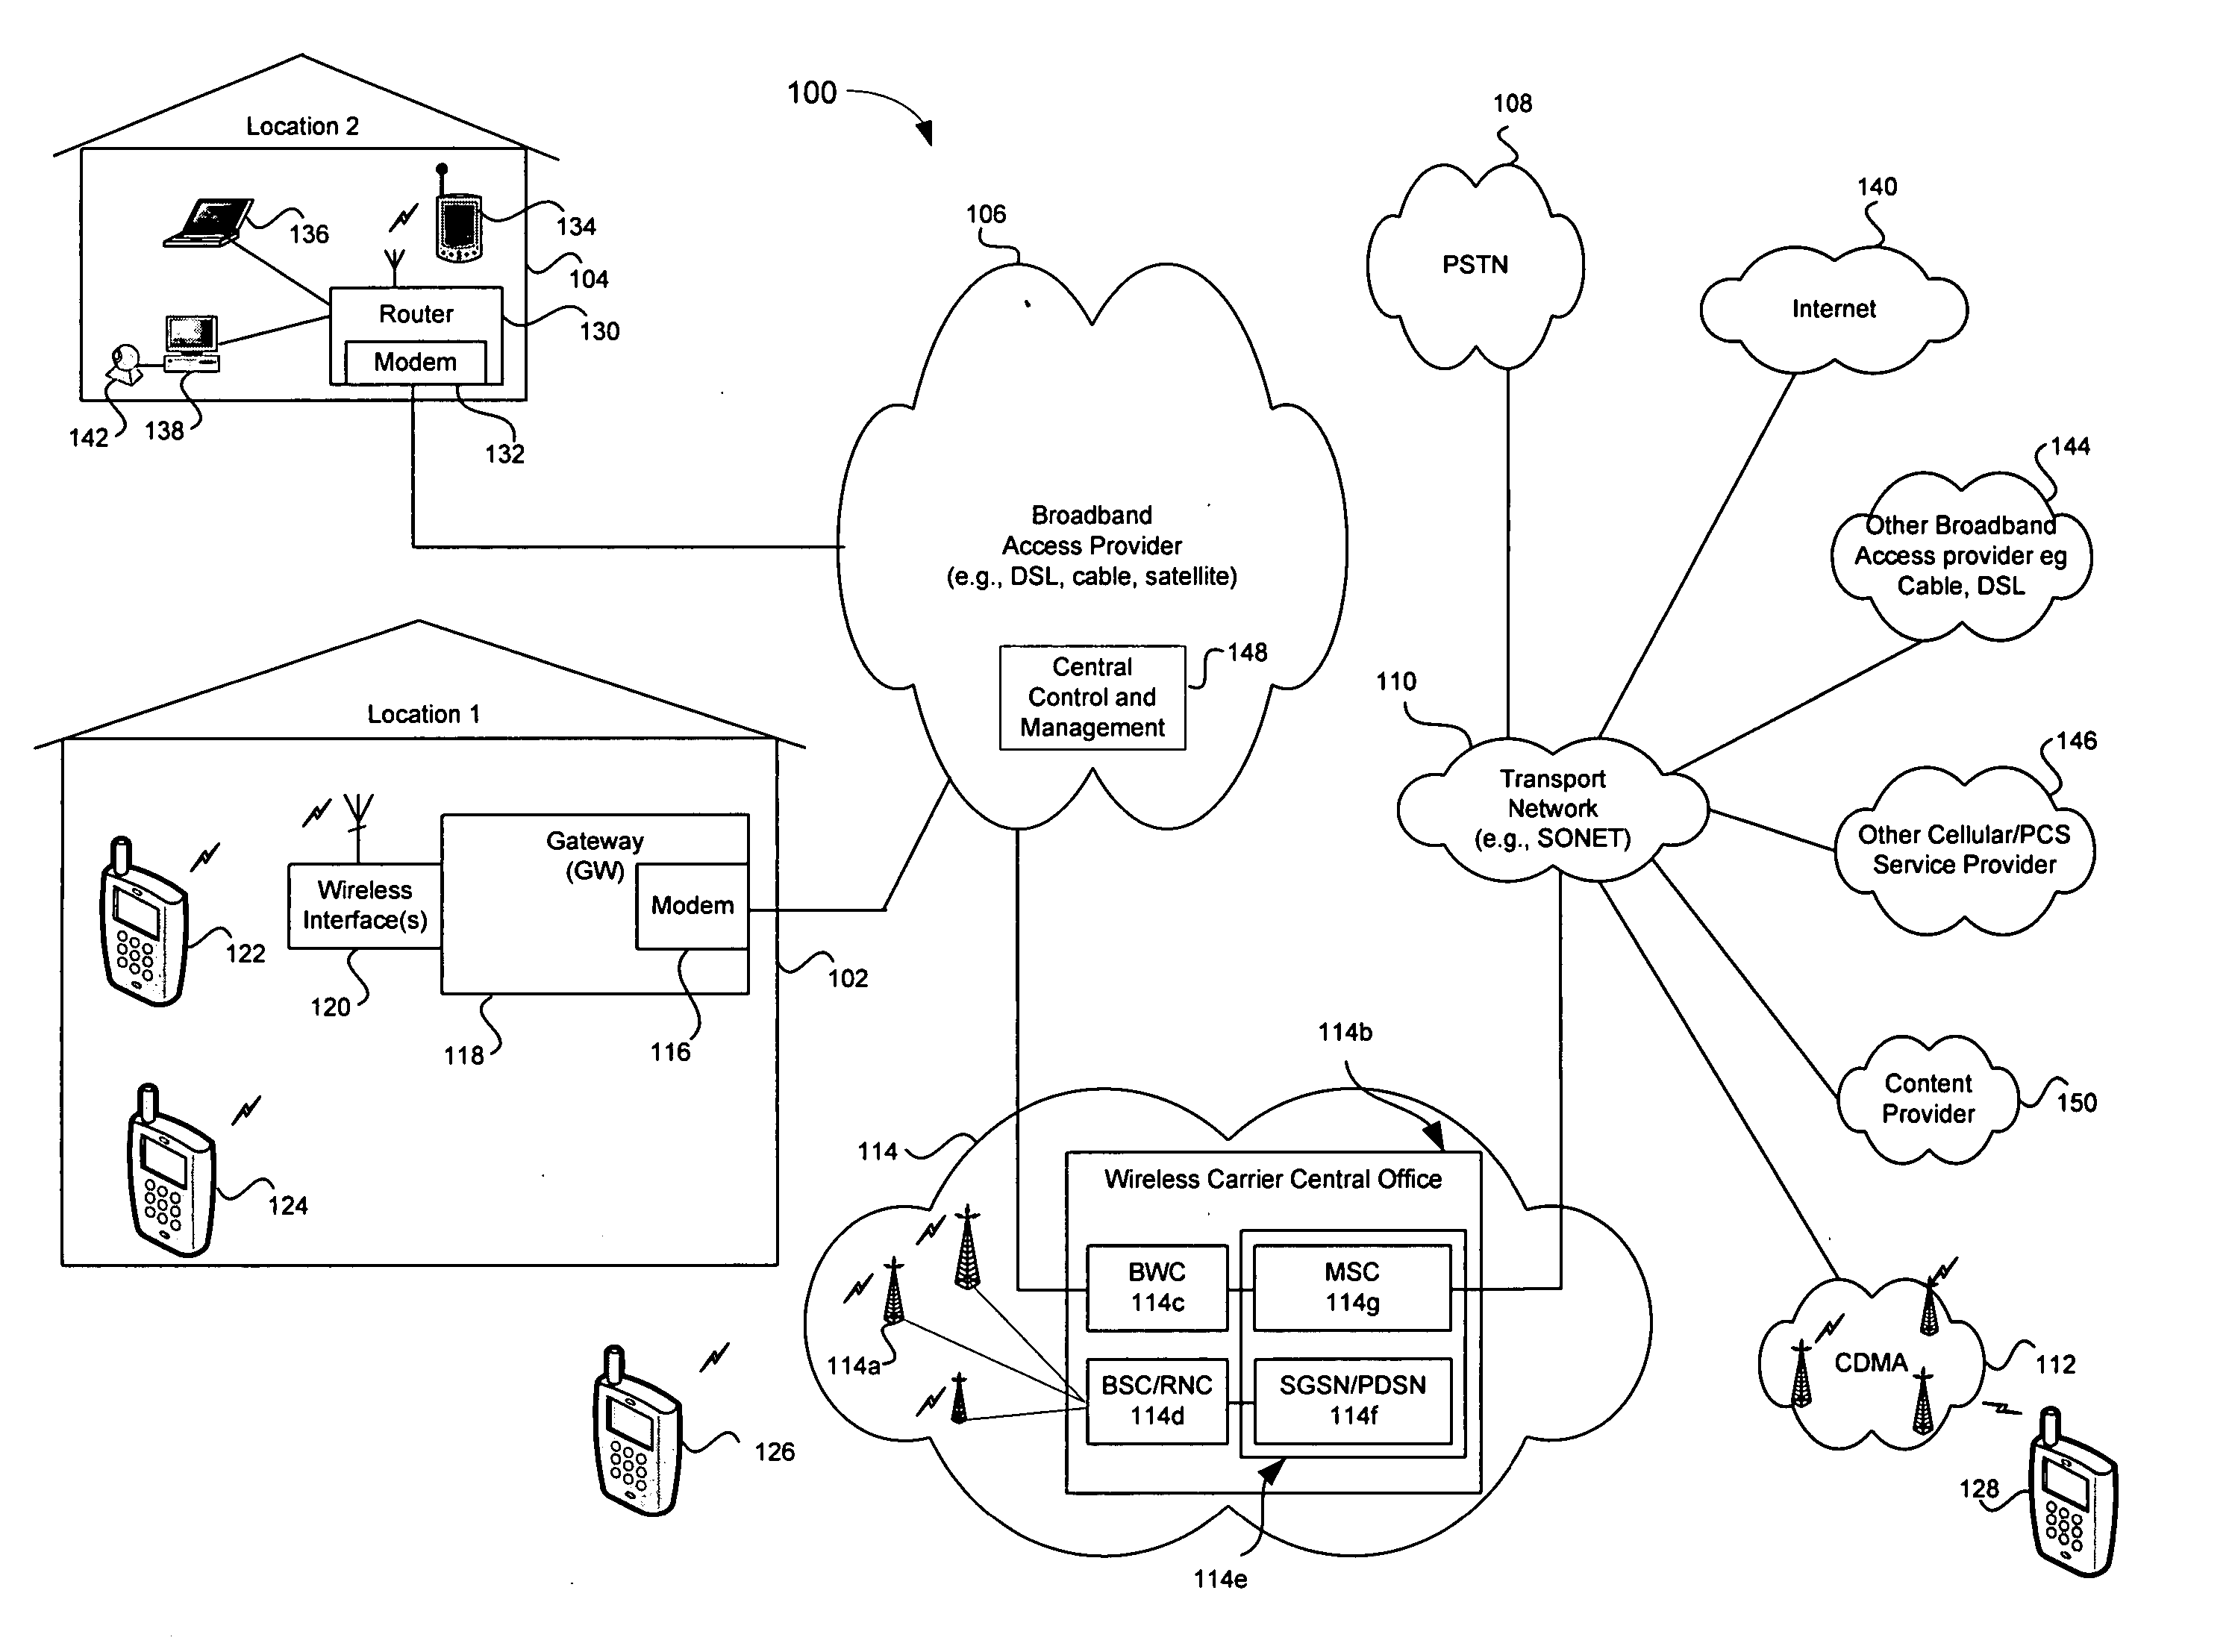 Enhanced caller ID information based on access device information via a broadband access gateway